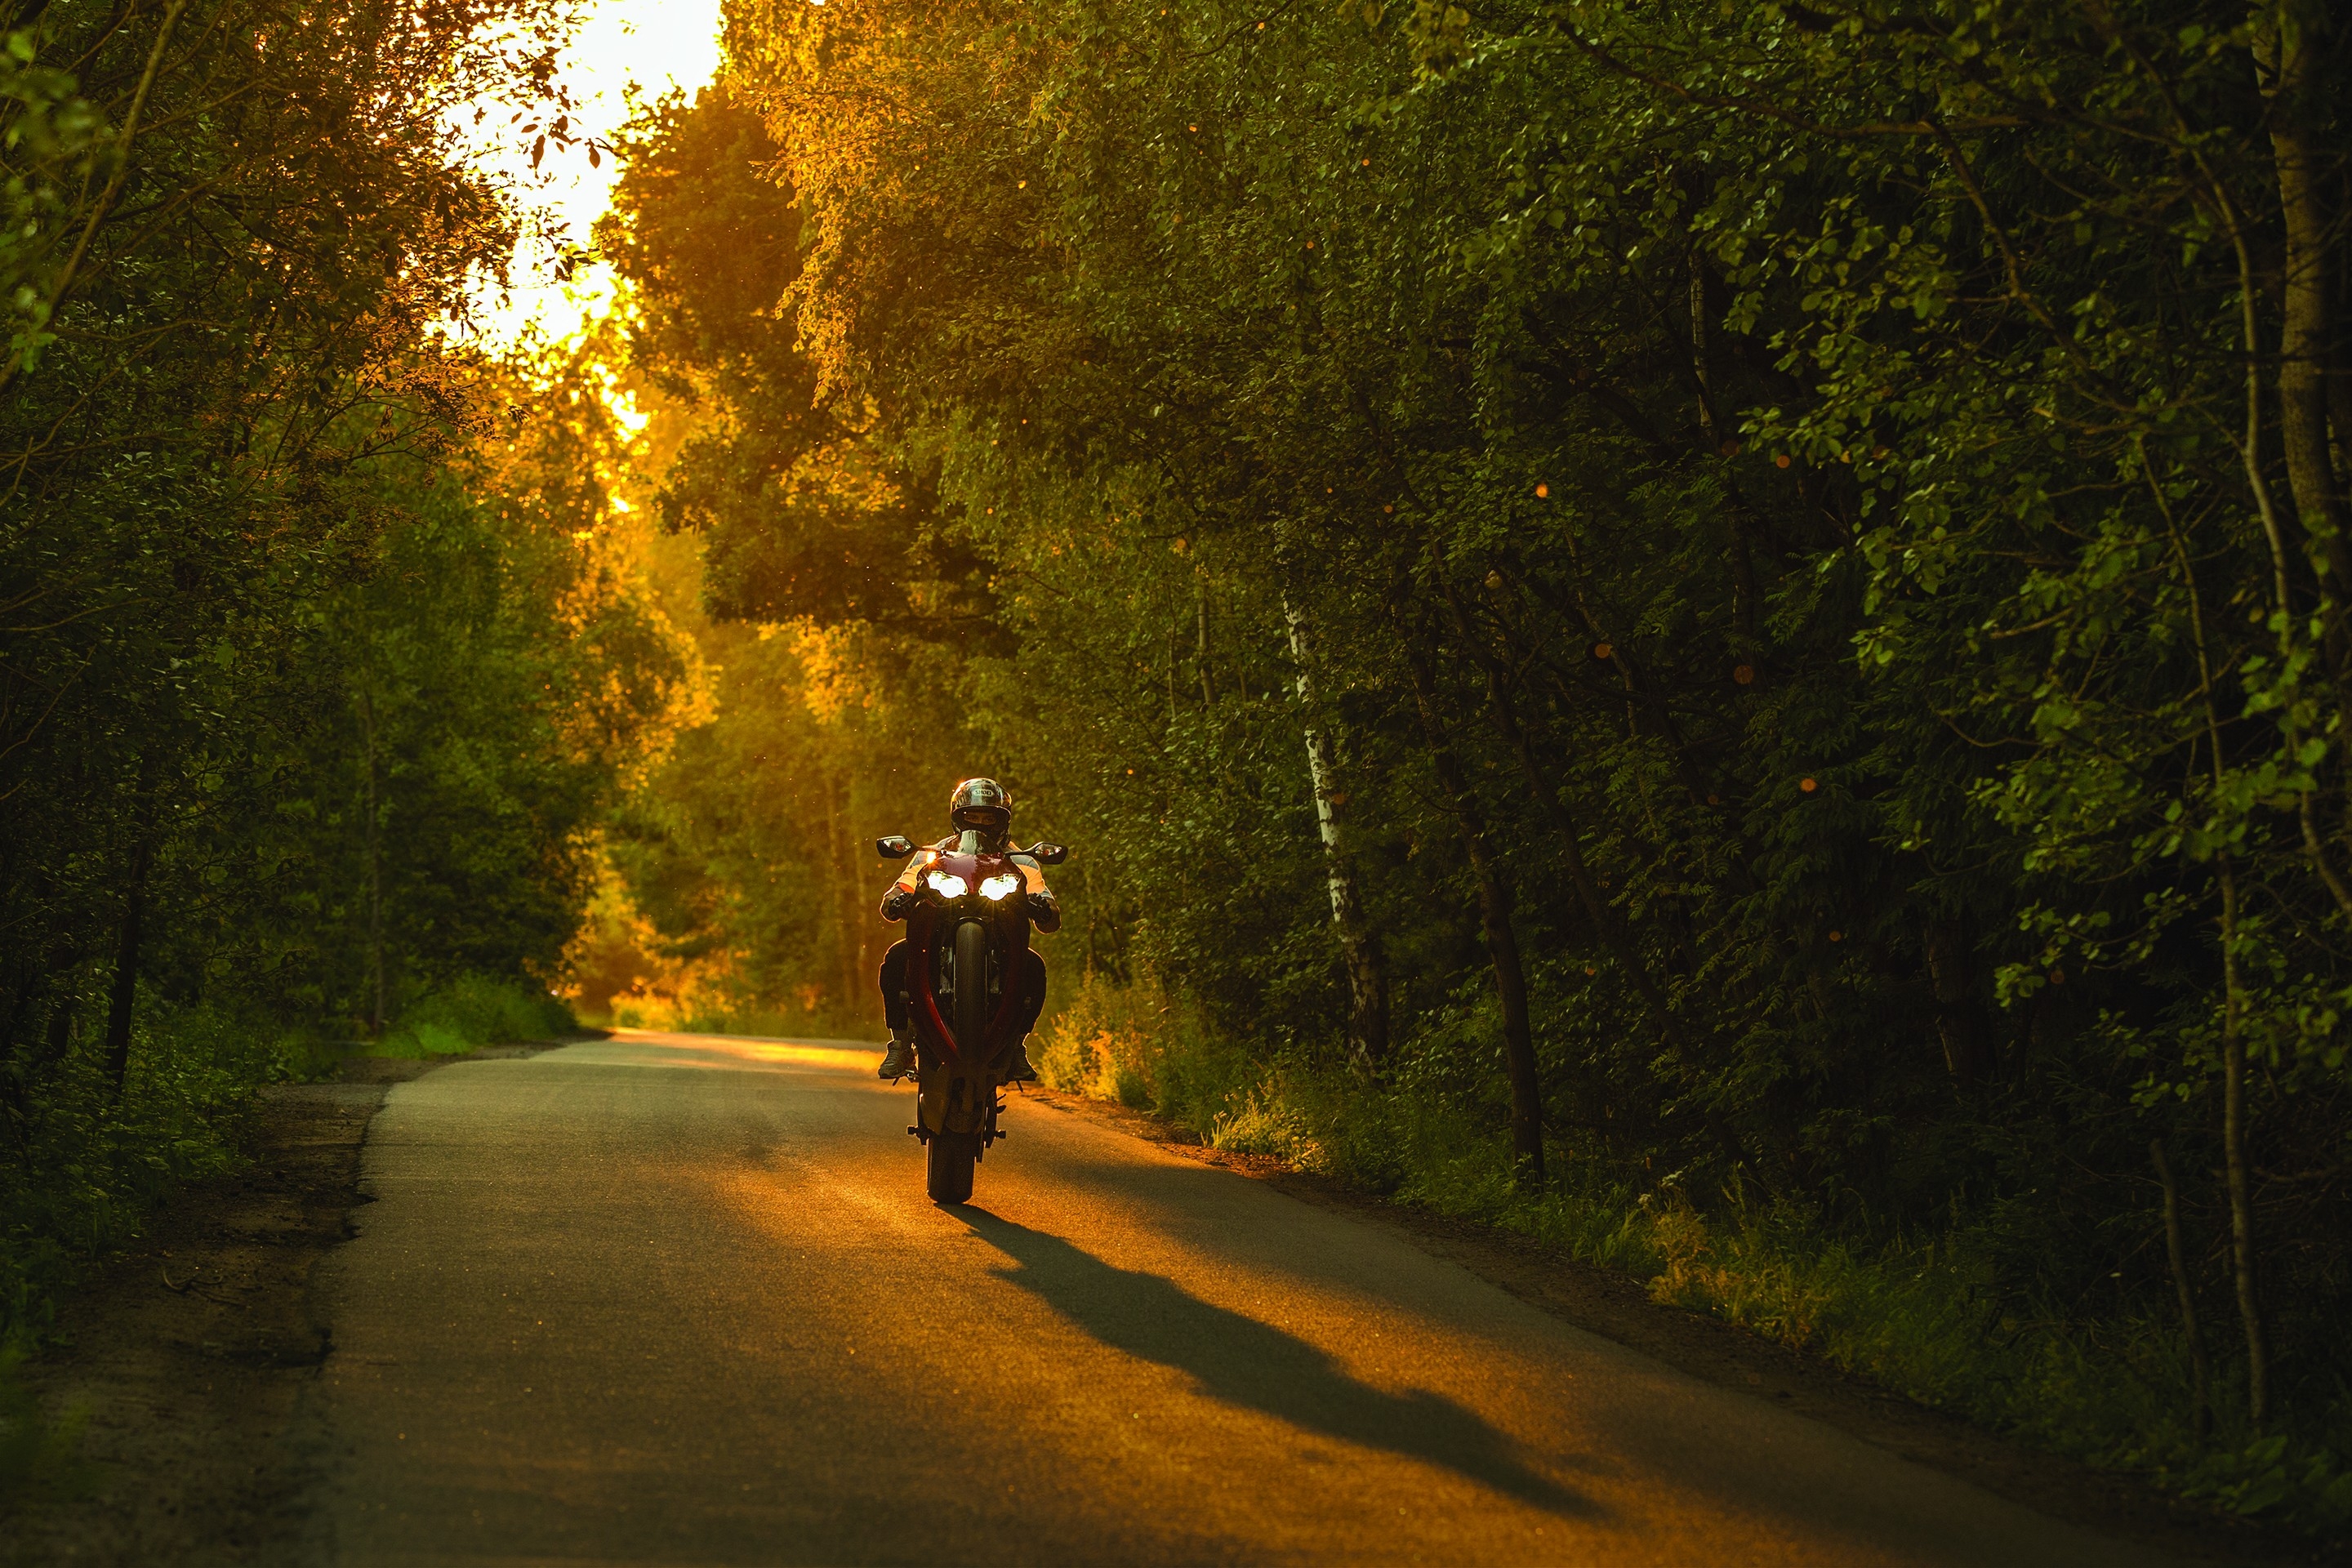 Honda cbr 1000 riding on the rear wheel through the woods at sunset